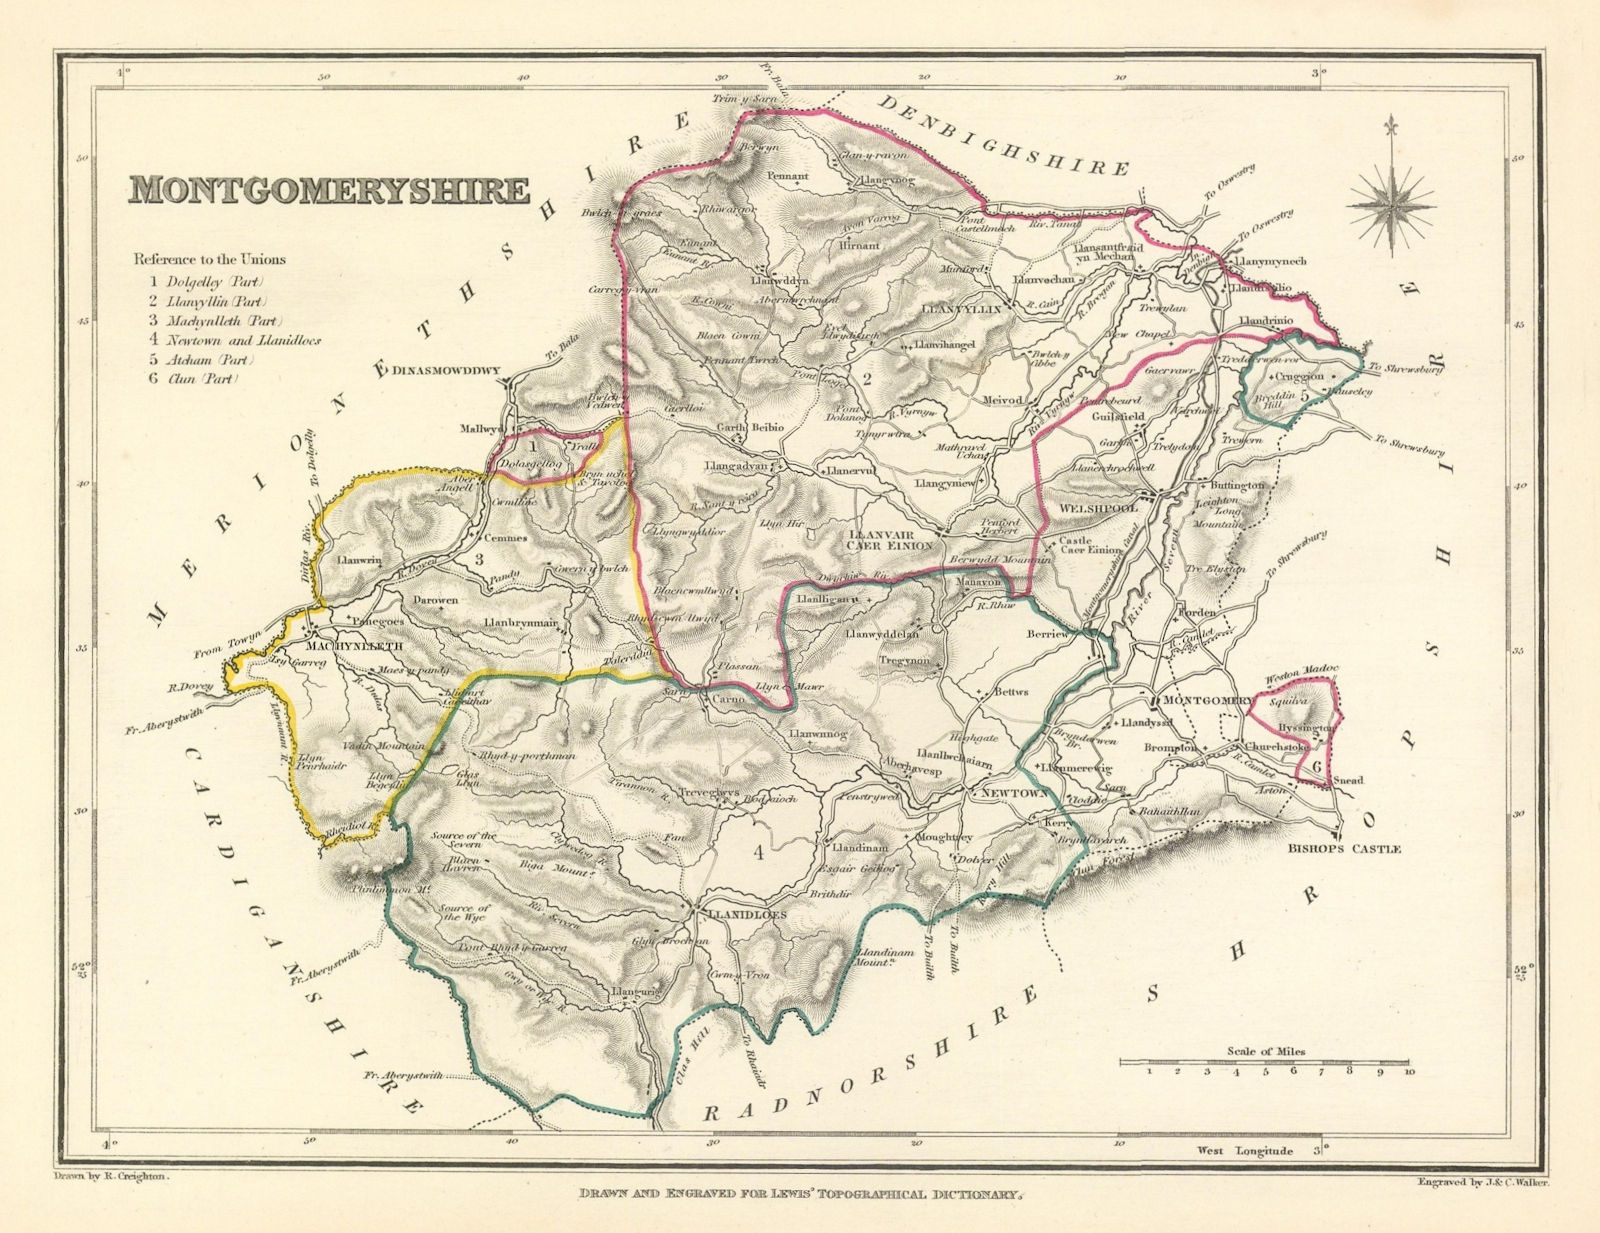 Antique county map of MONTGOMERYSHIRE by Creighton & Walker for Lewis c1840